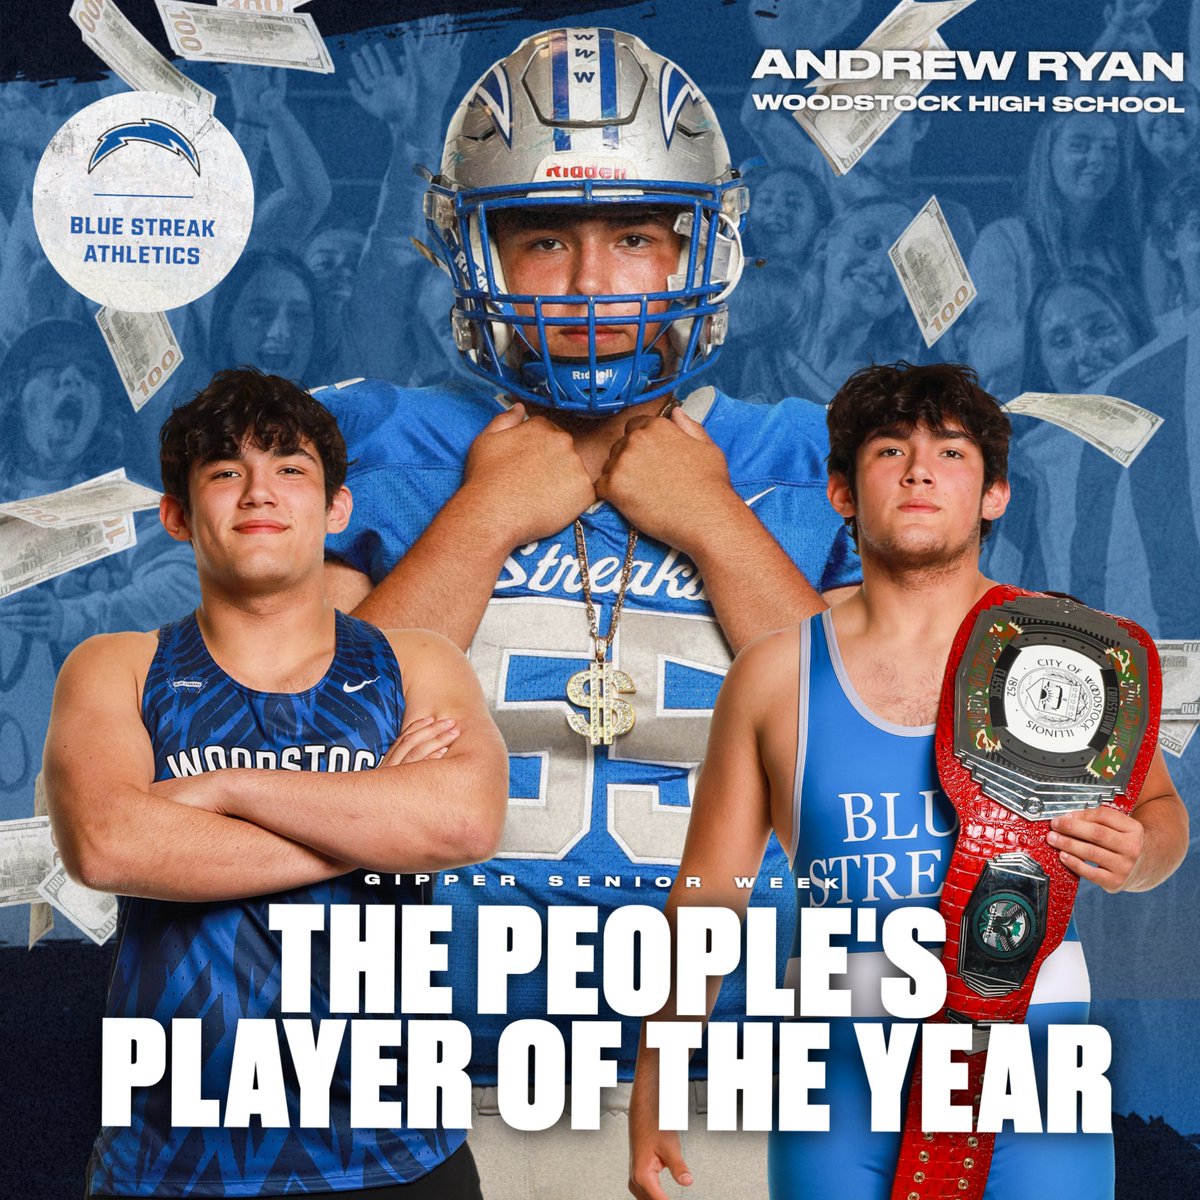 Our nominee for Boys People's Player of the Year, as voted on by the students... ANDREW RYAN 💙⚡️ Like, comment & share for Andrew! @gogipper #GipperSeniorWeek